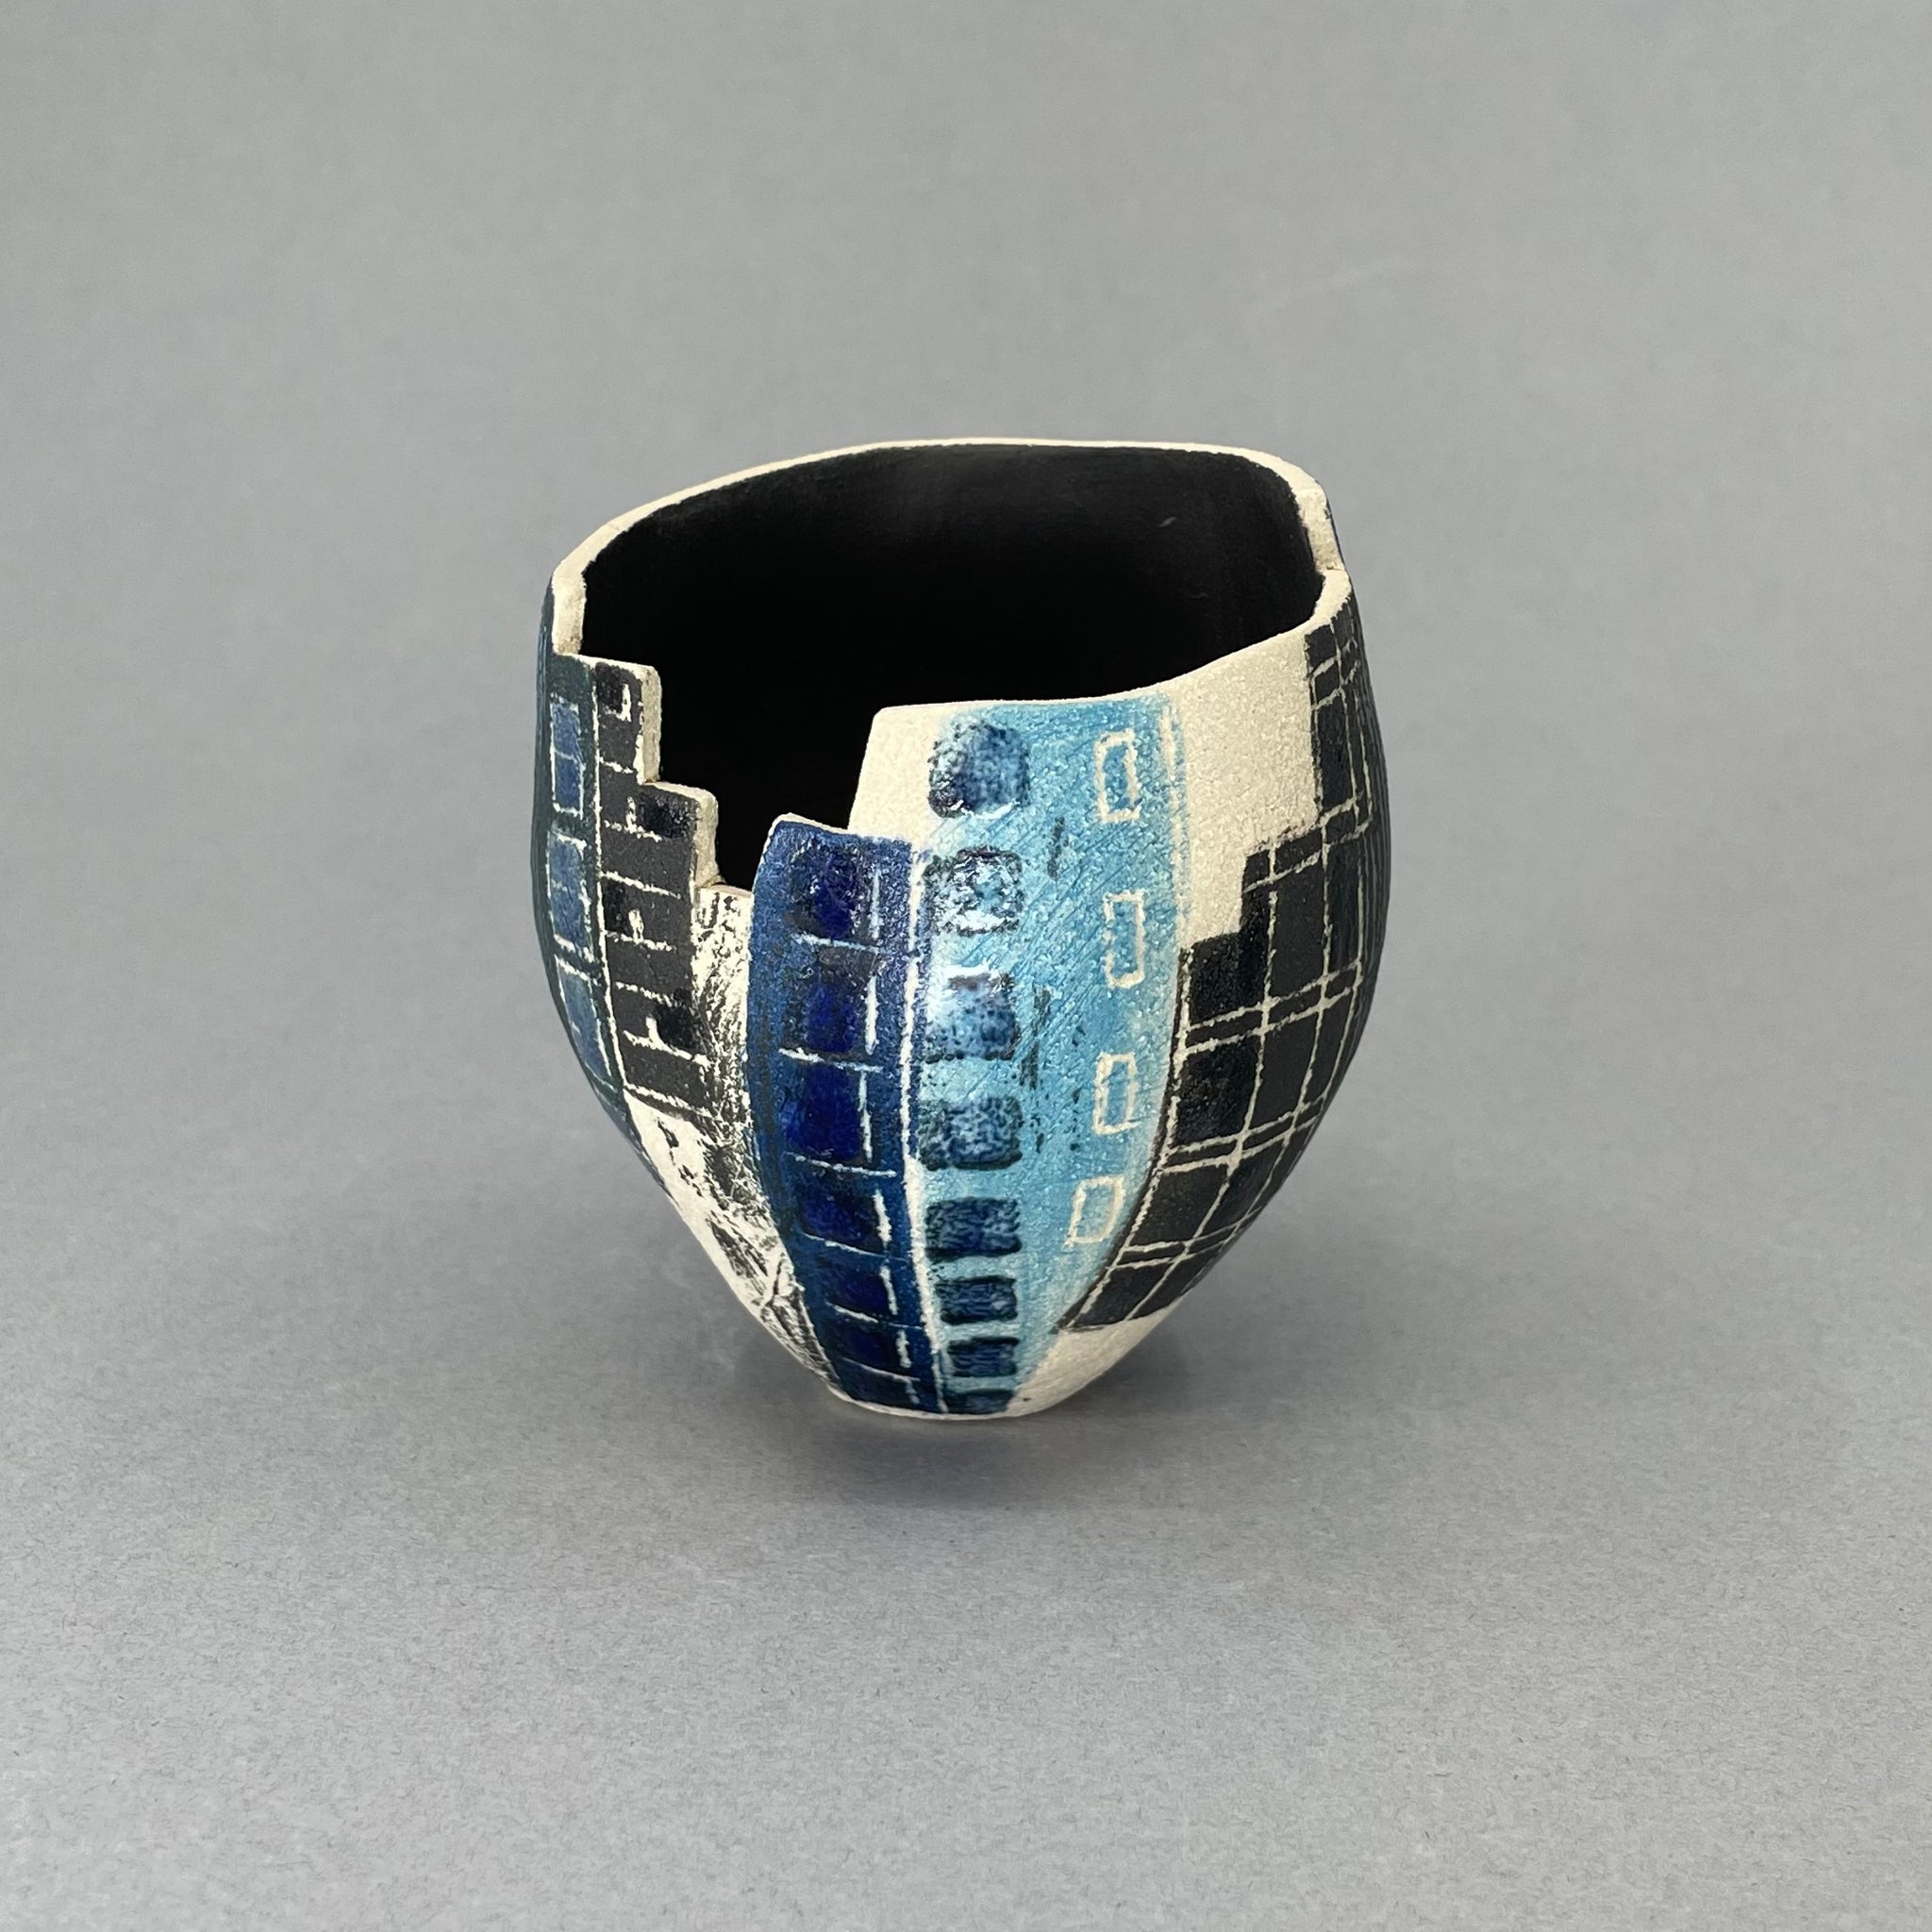 Inspired by a trip to Ground Zero in New York. Linda has hand-built this piece using white stoneware and decorated with slips and underglazes. Linda uses various techniques including Sgraffito, inlay and printing to create her architectural collection.  This piece measures approximately 9cm high and 7cm in diameter.Small New York Vessel